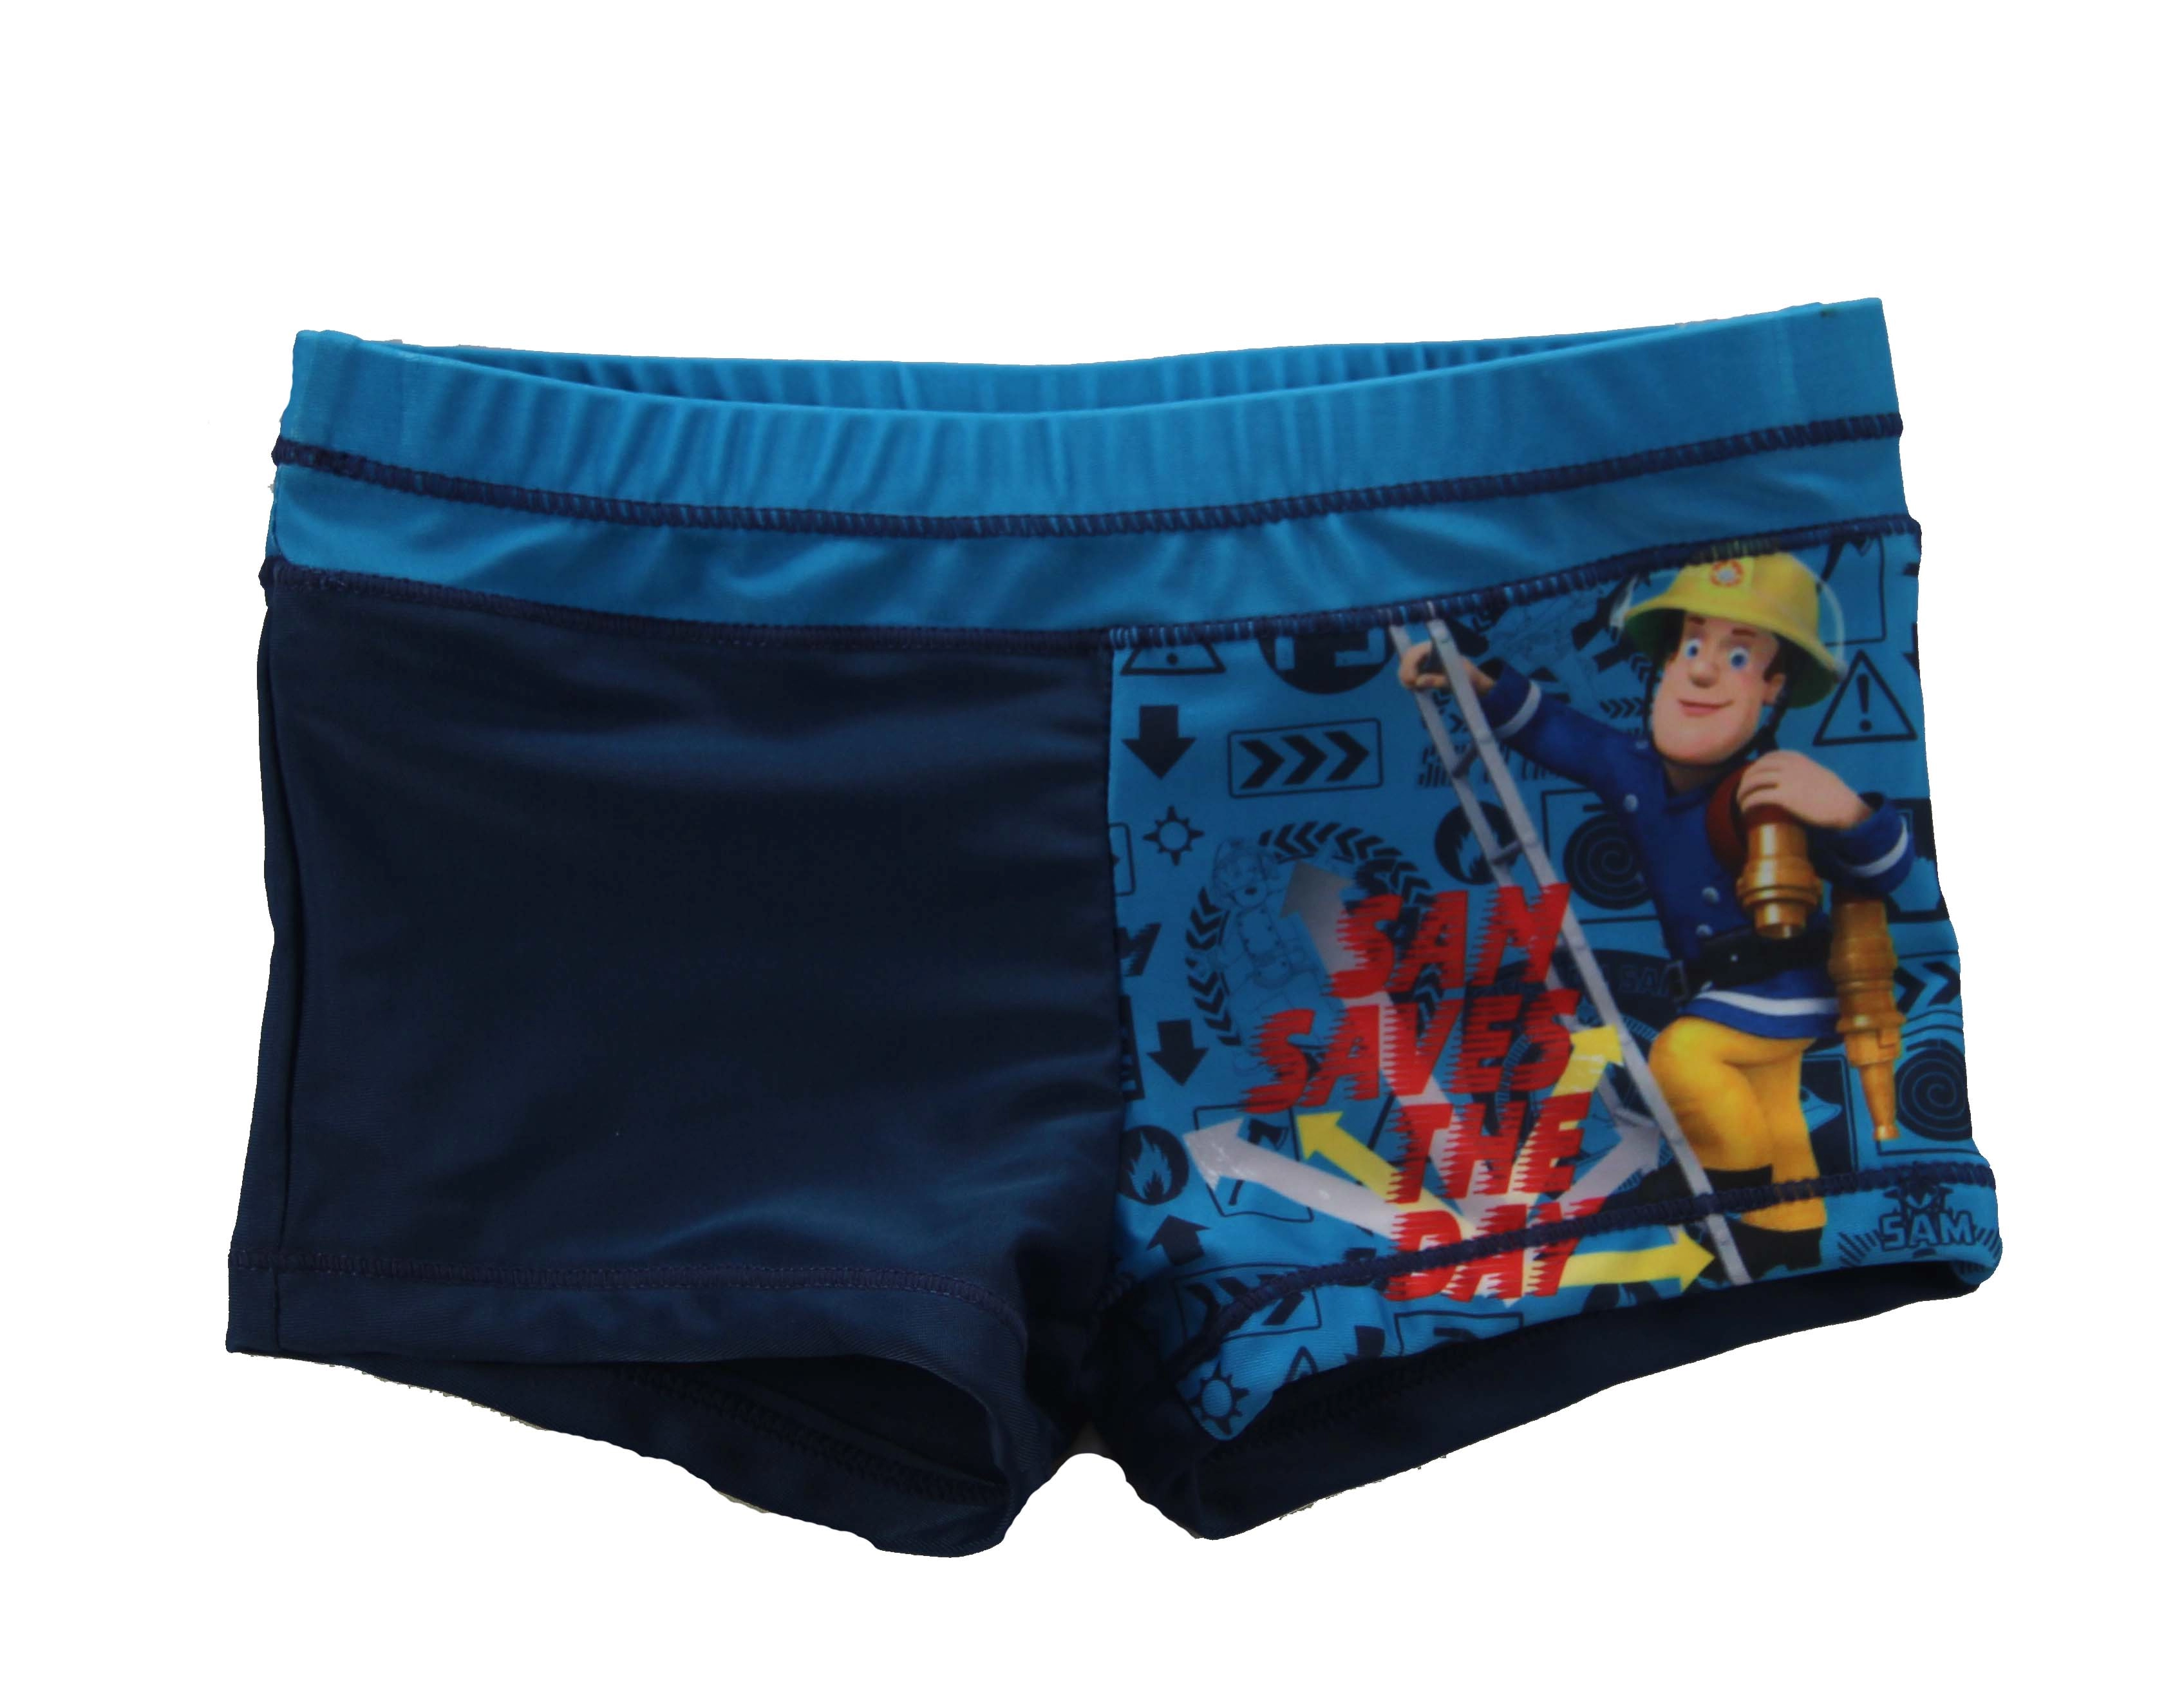 Navy Infant Boys Swimming Briefs